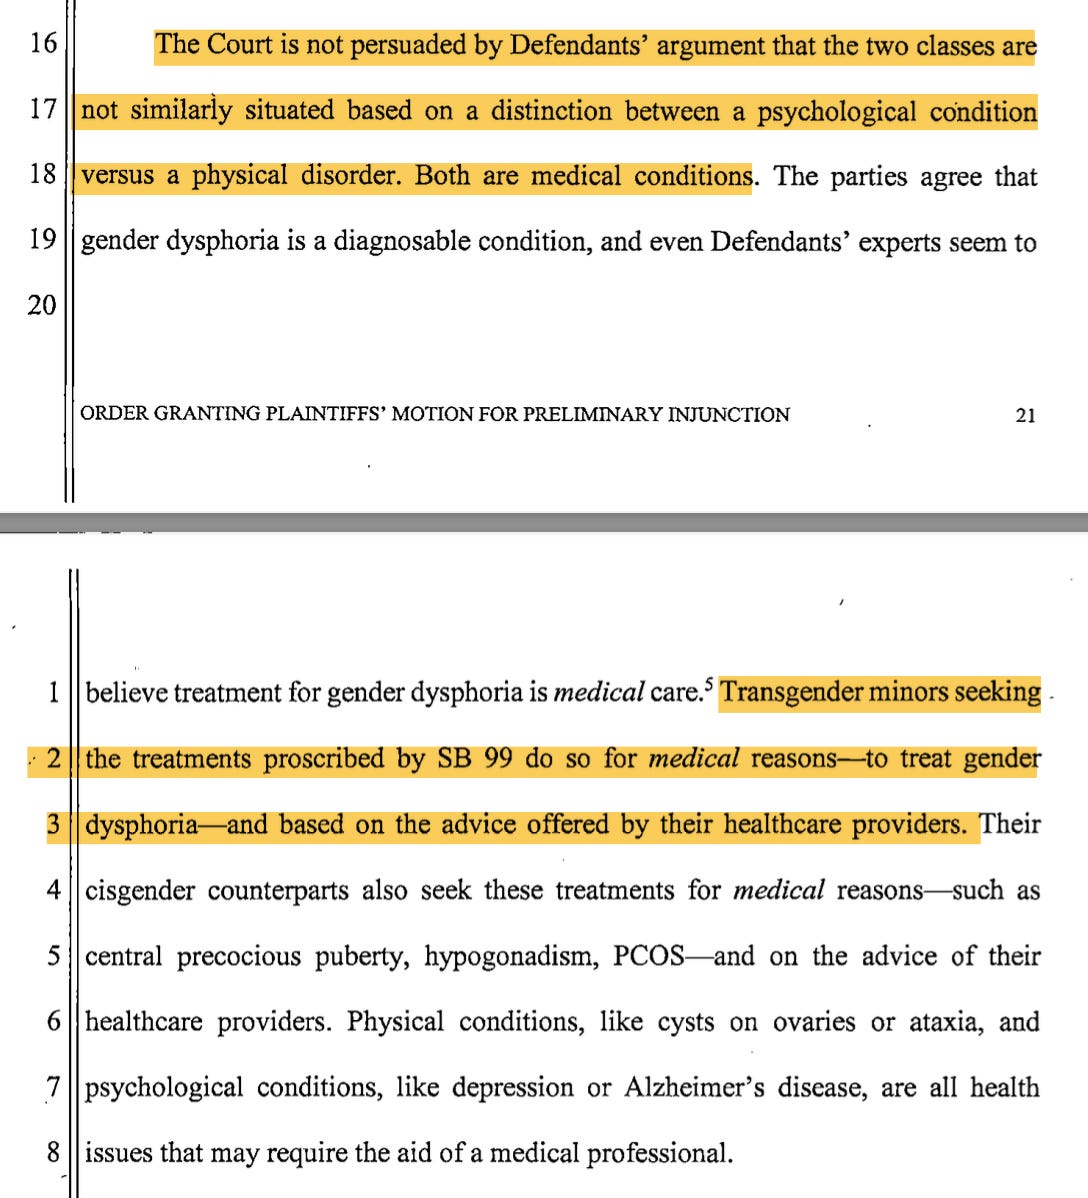 The Court is not persuaded by Defendants' argument that the two classes are n o t similarly situated based on a distinction between a psychological condition v e r s u s a physical disorder. Both are medical conditions. The parties agree that gender dysphoria is a diagnosable condition, and even Defendants' experts seem to elieve treatment for gender dysphoria is medical care. Transgender minors seeking : 2 the treatments proscribed by SB 99 do so for medical reasons--to treat gender 3 dysphoria-and based on the advice offered by their healthcare providers. Their 4 cisgender counterparts also seek these treatments for medical reasons such as 5 central precocious puberty, hypogonadism, COS and on the advice of their 6 healthcare providers. Physical conditions, like cysts on ovaries or ataxia, and psychological conditions, like depression or Alzheimer's disease, are al health issues that may require the aid of a medical professional.